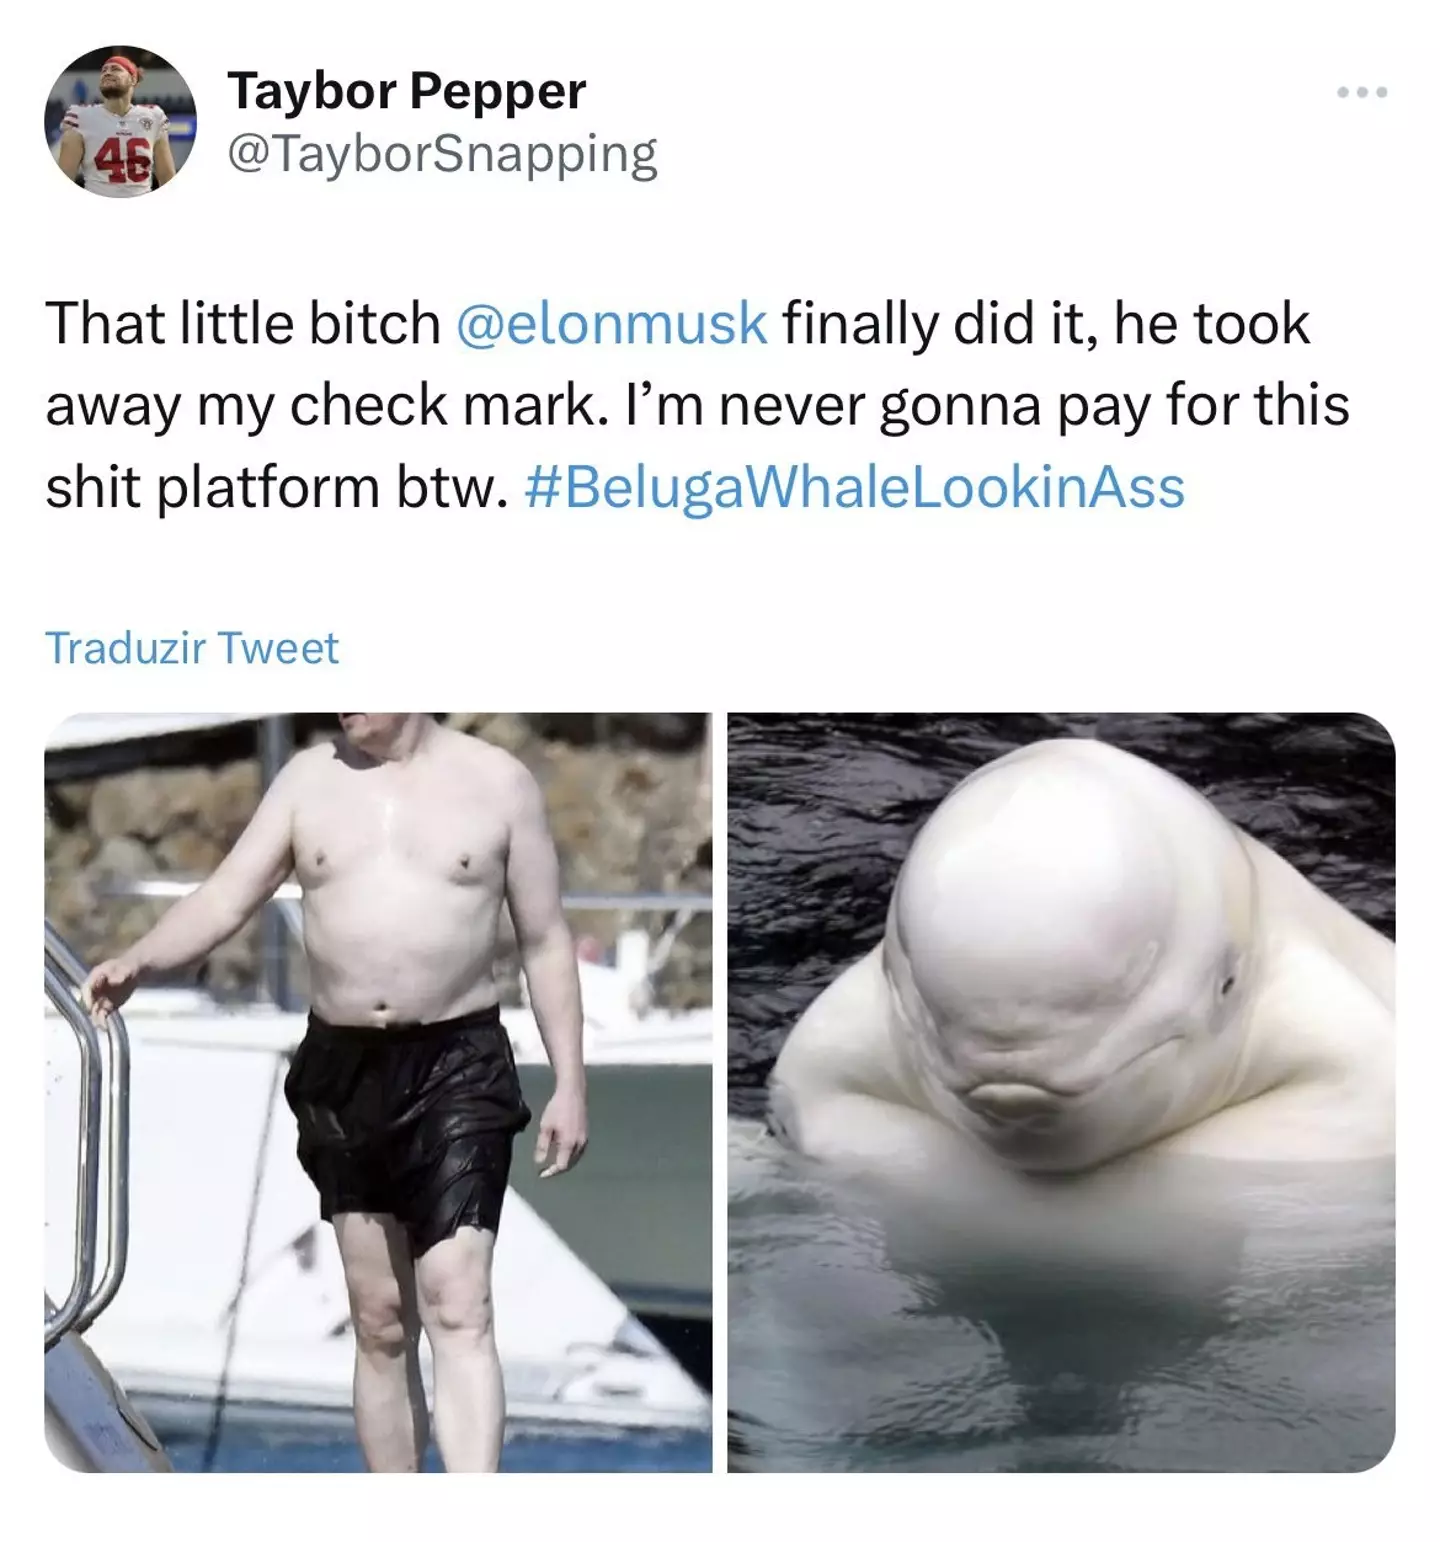 San Francisco 49ers player Taybor Pepper dropped his callout of Elon Musk in a now-deleted tweet.